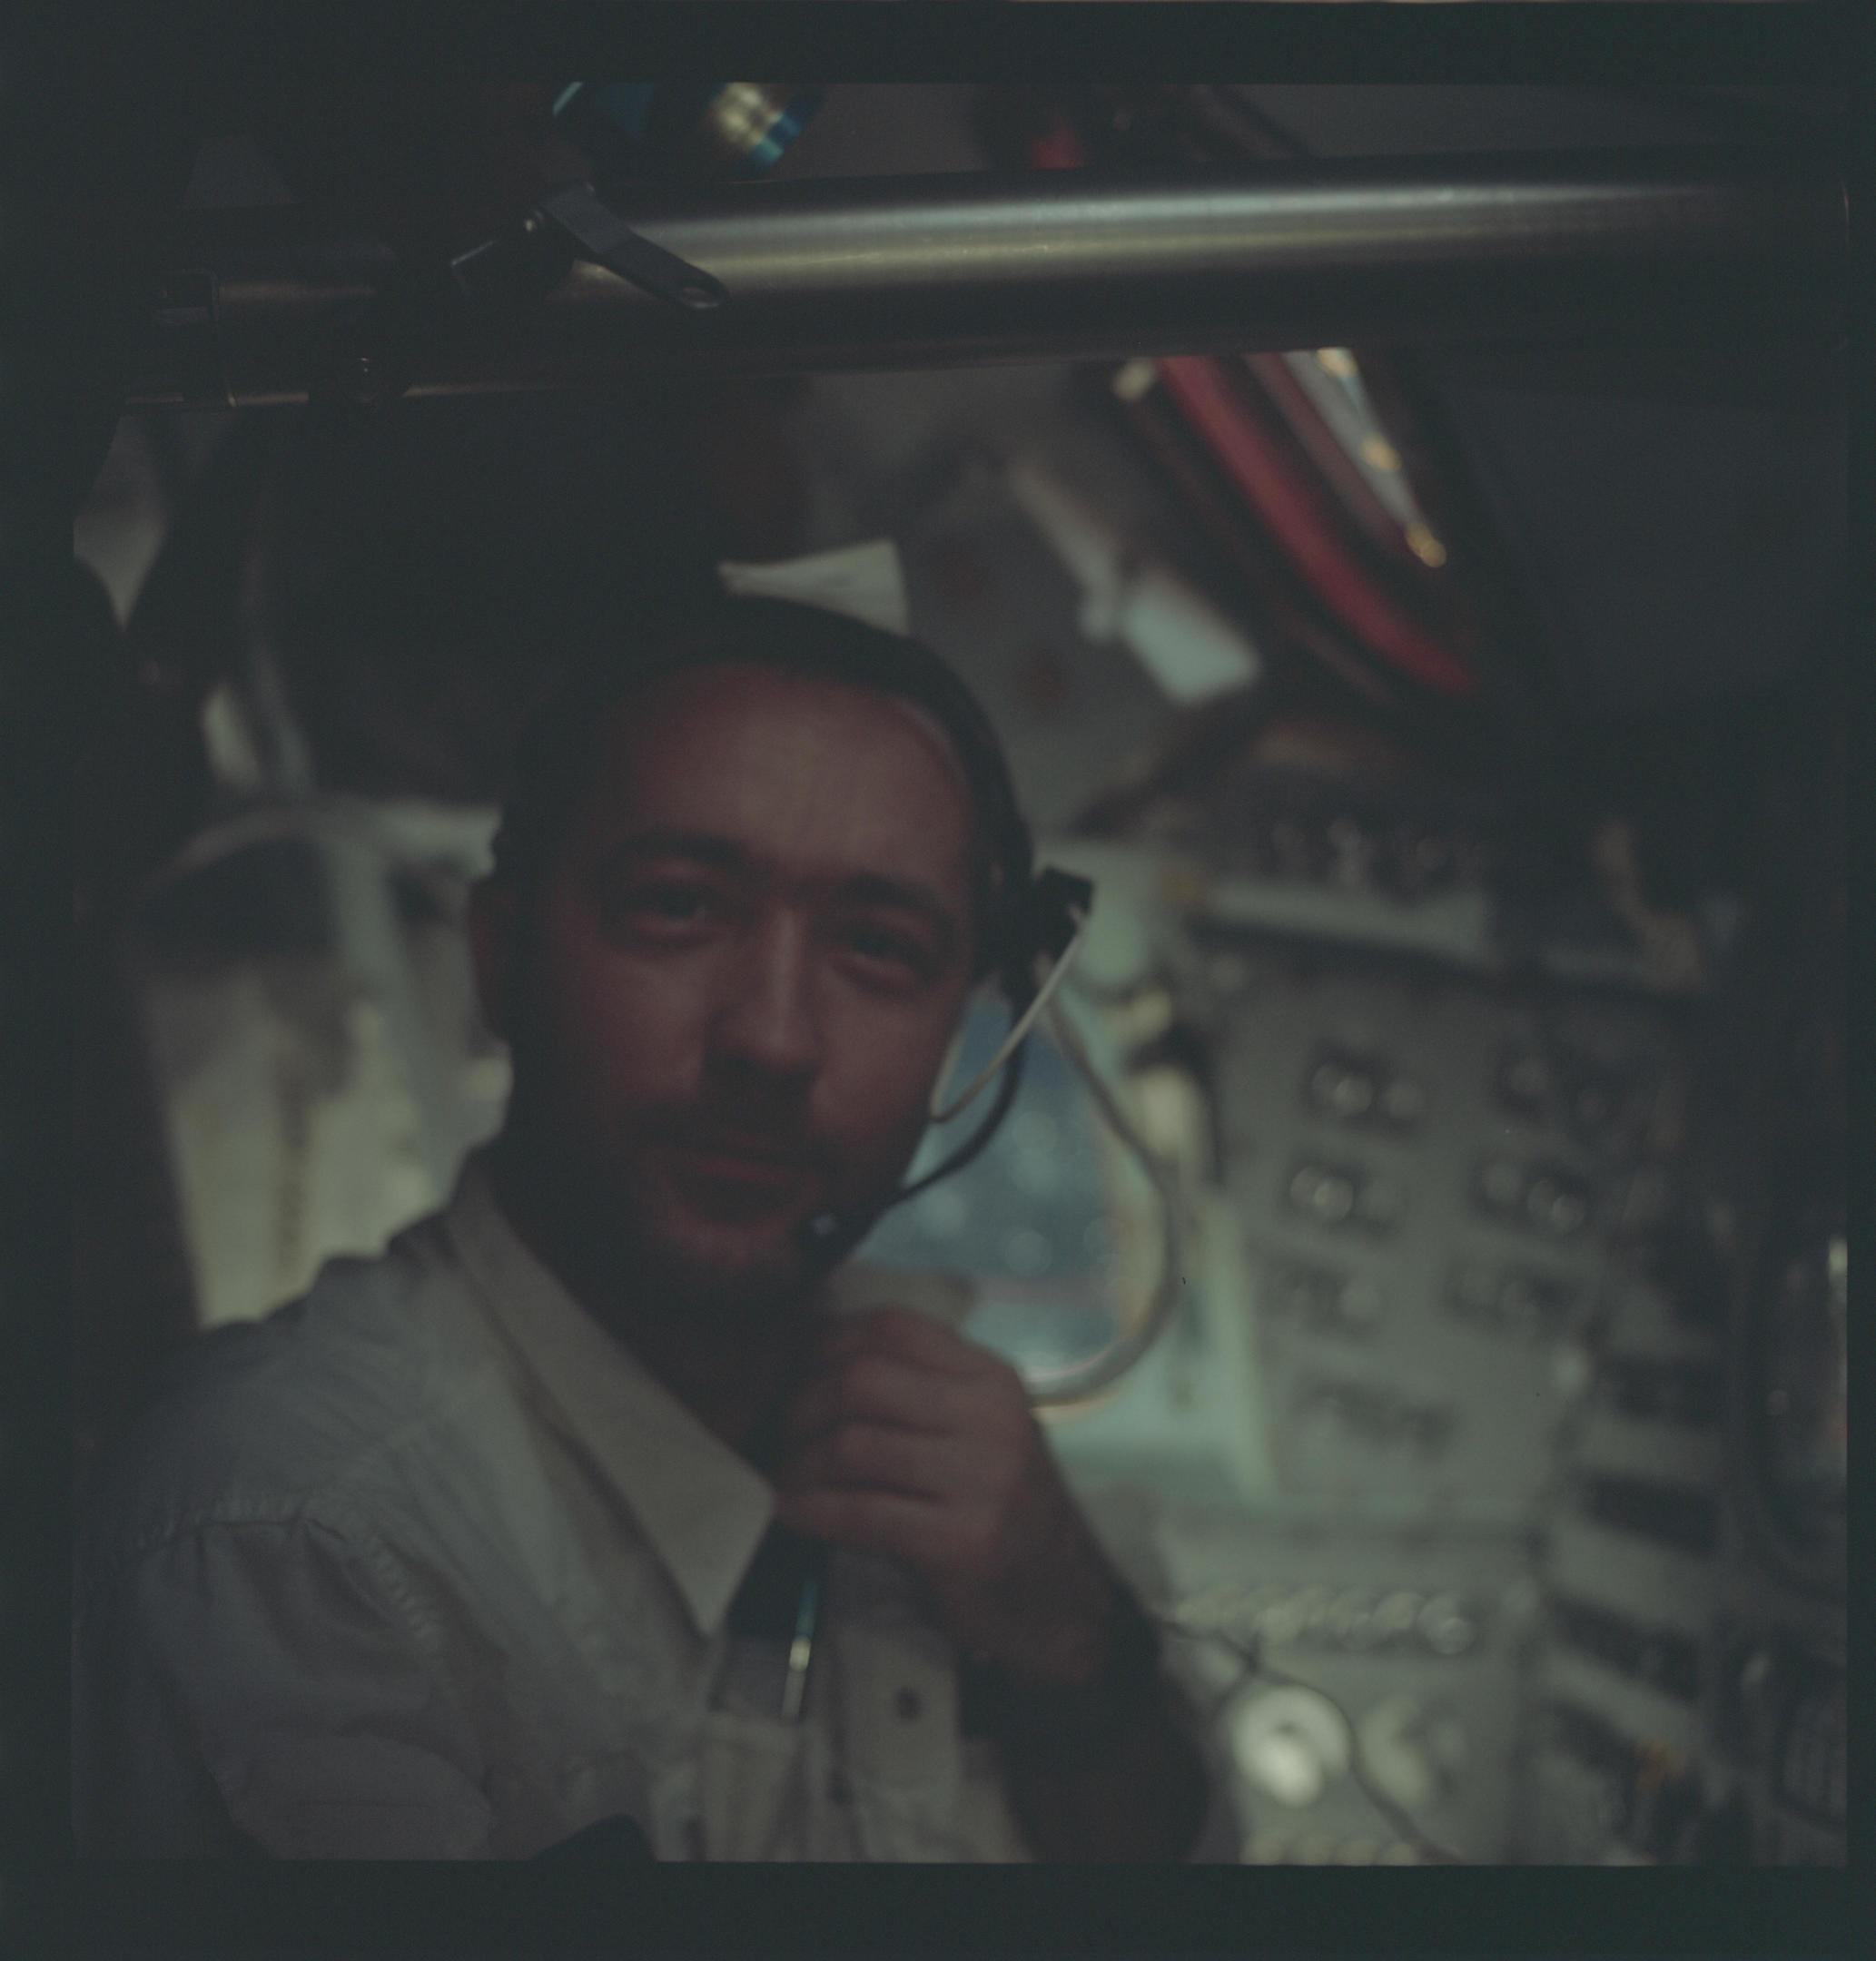 The astronauts took very few pictures of each other